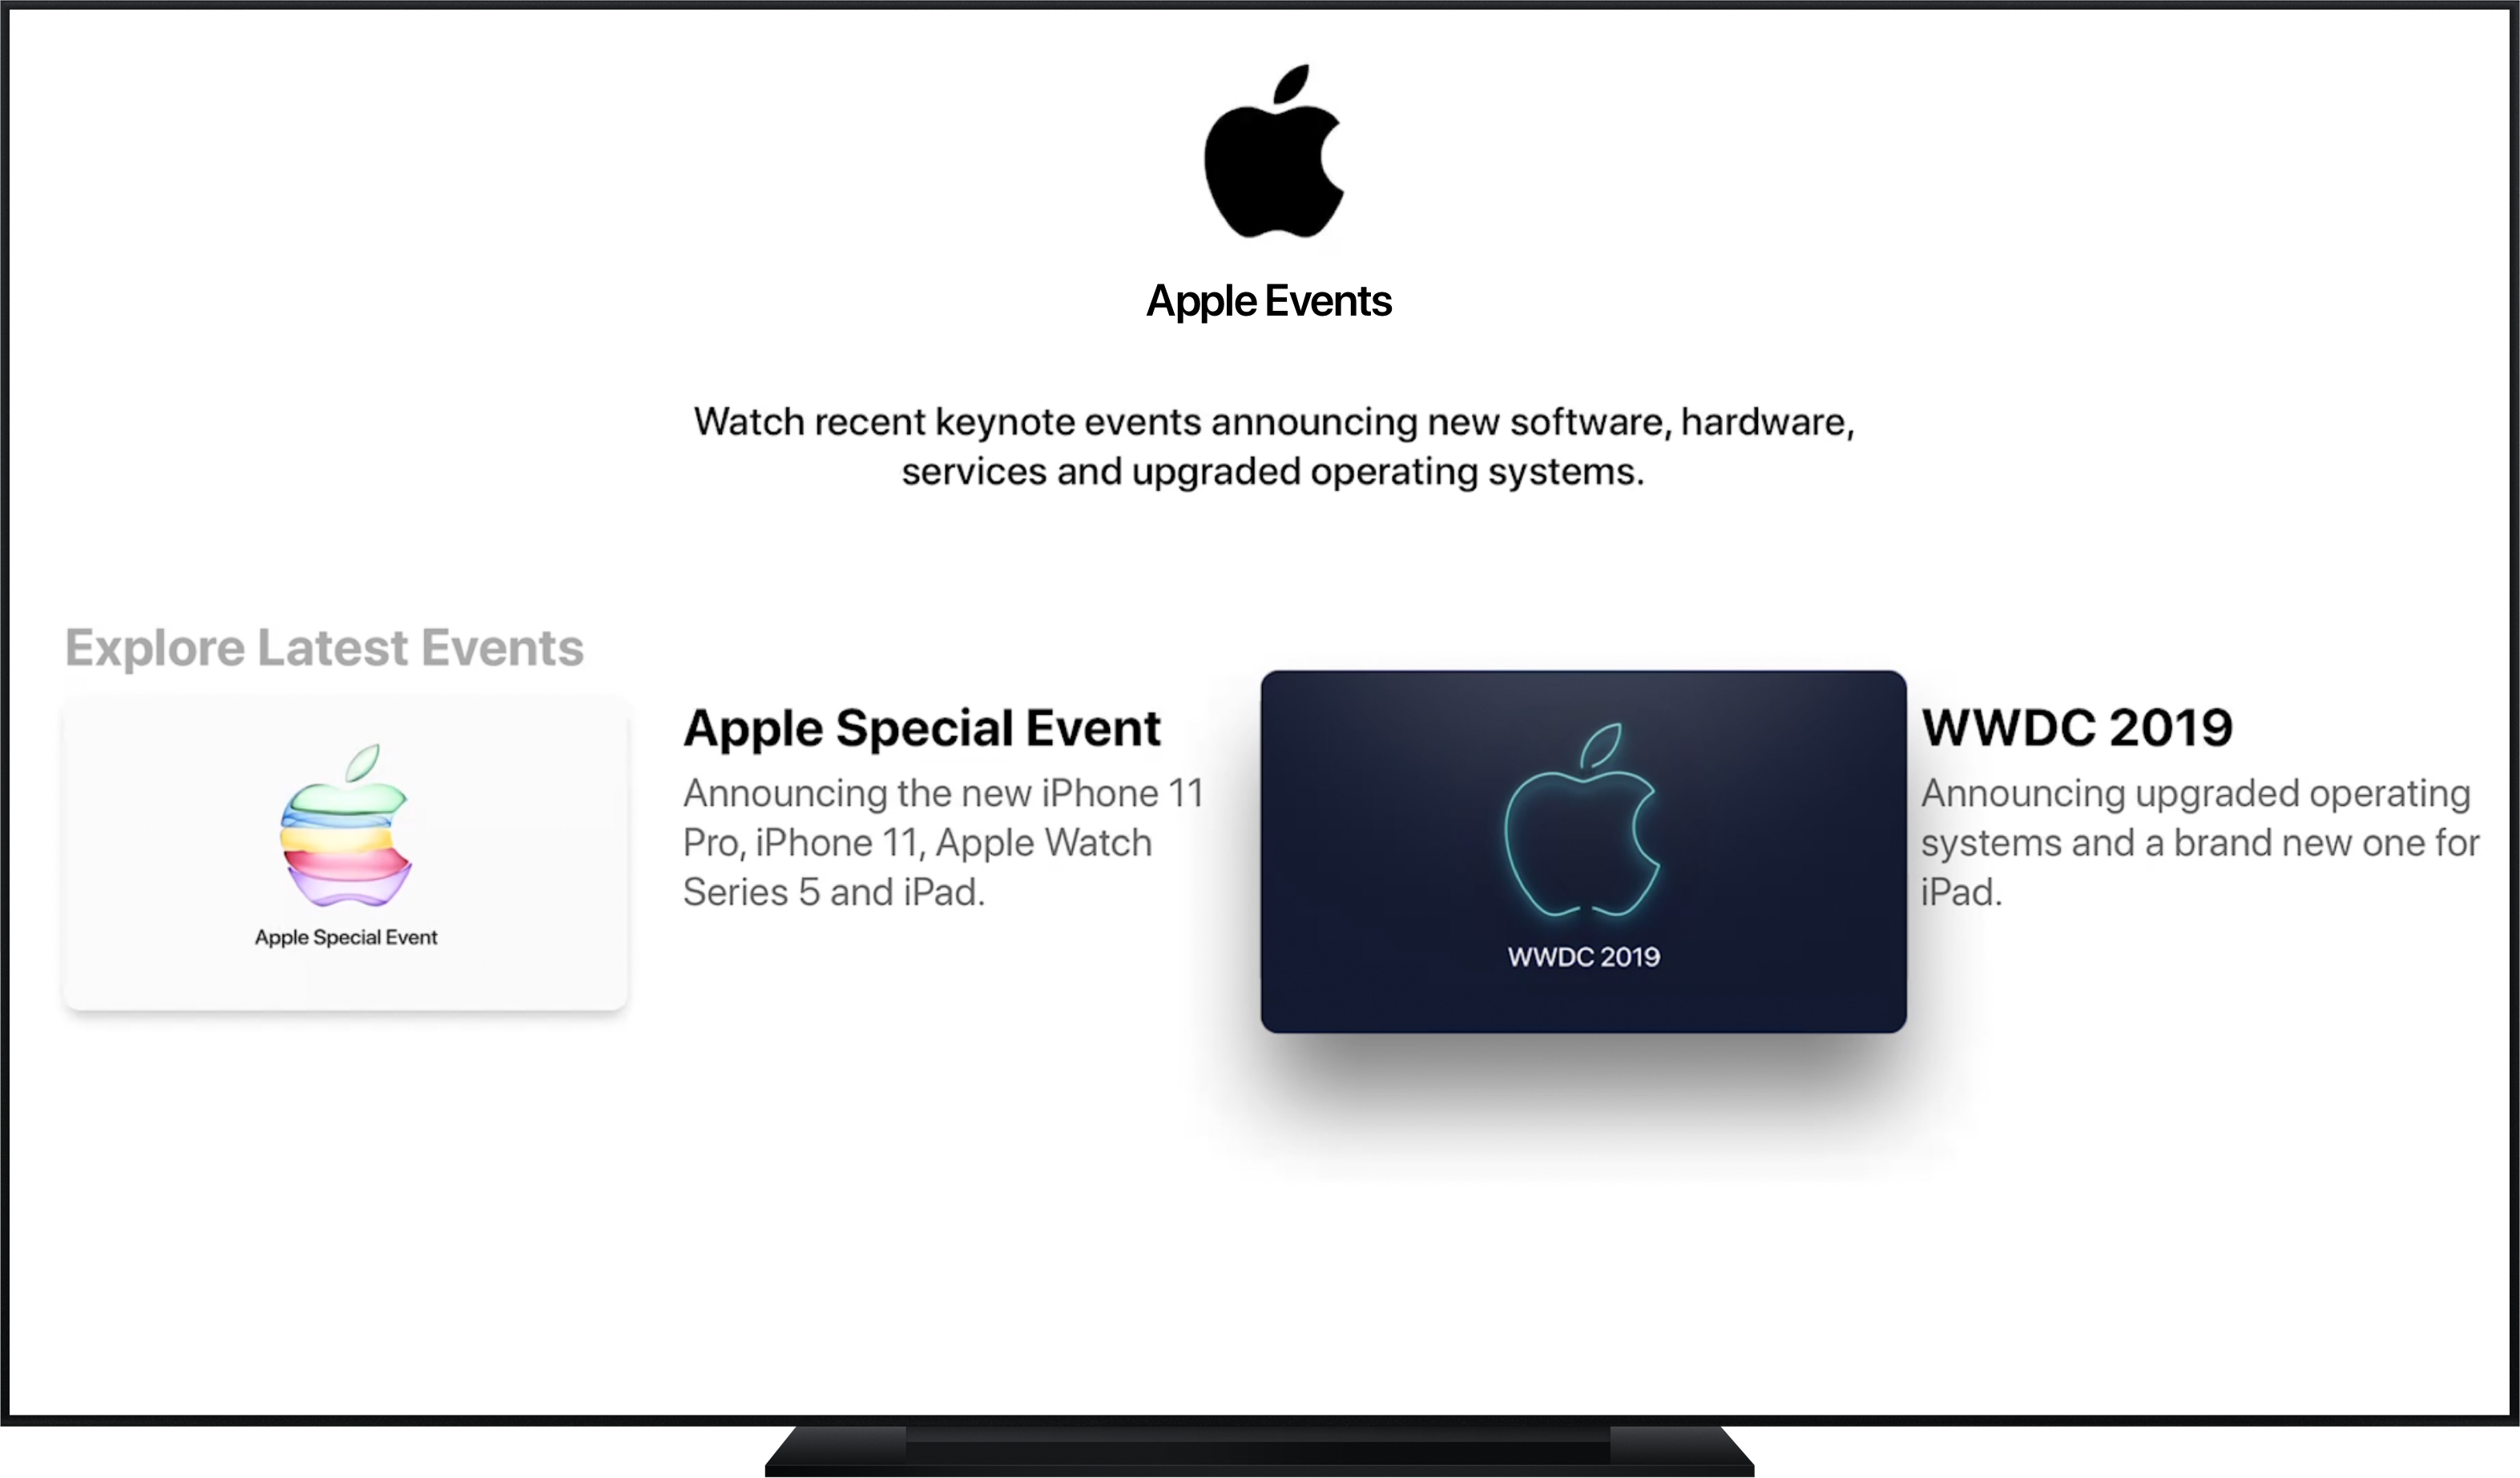 The Apple TV app has a special section dedicated to Apple events